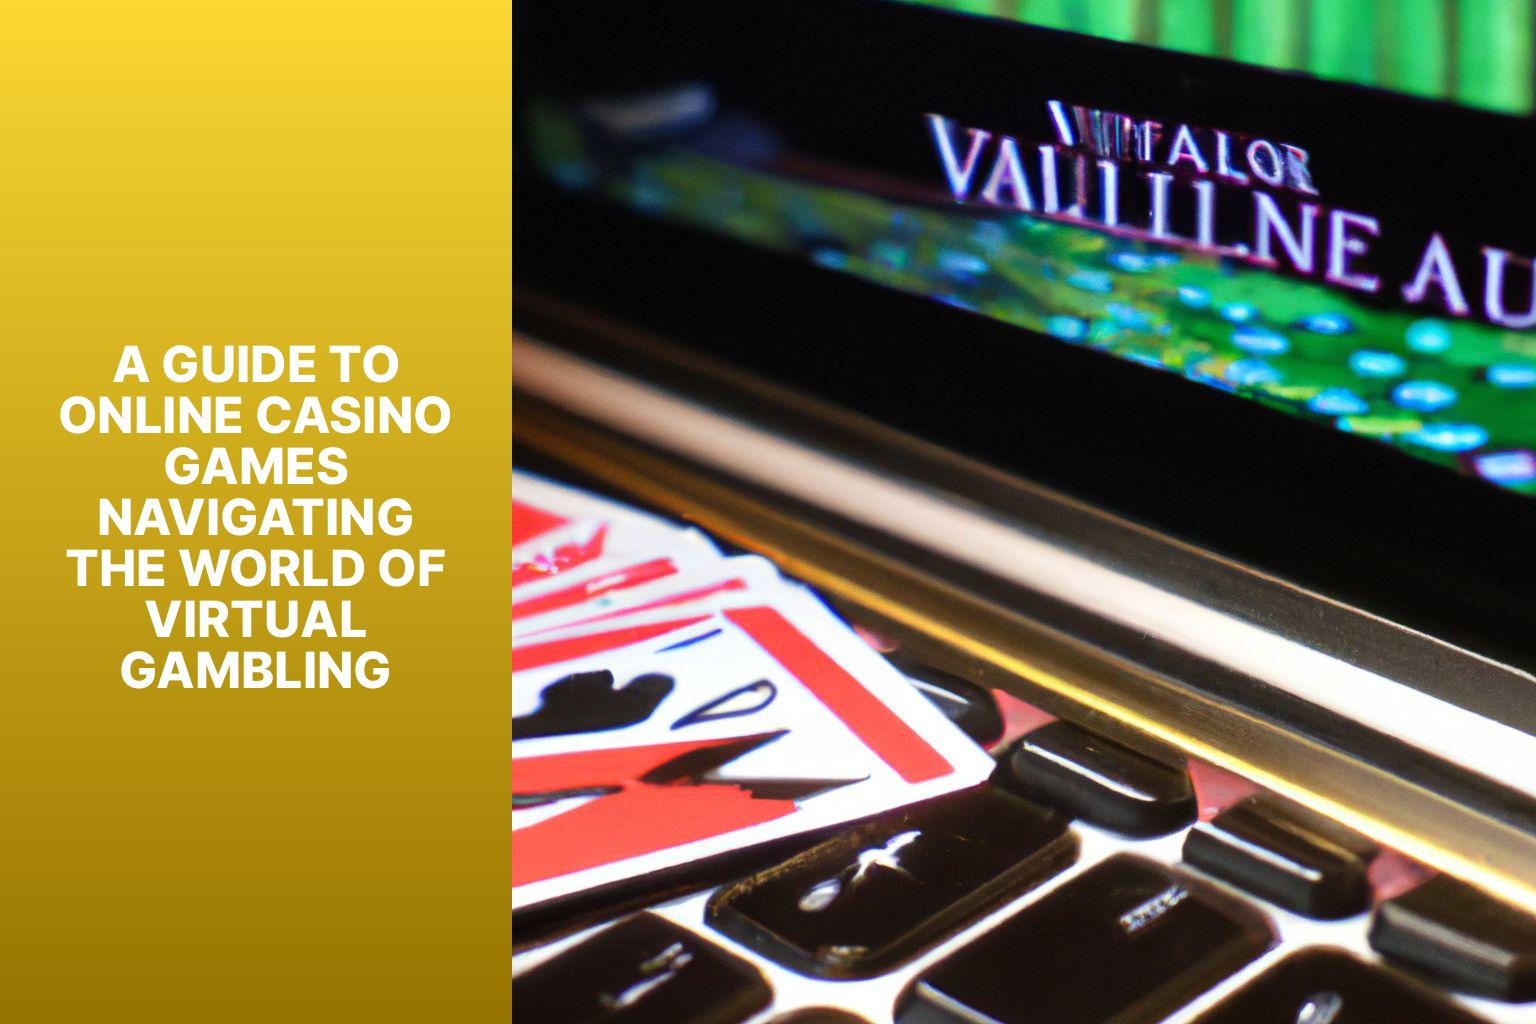 A Guide to Online Casino Games Navigating the World of Virtual Gambling